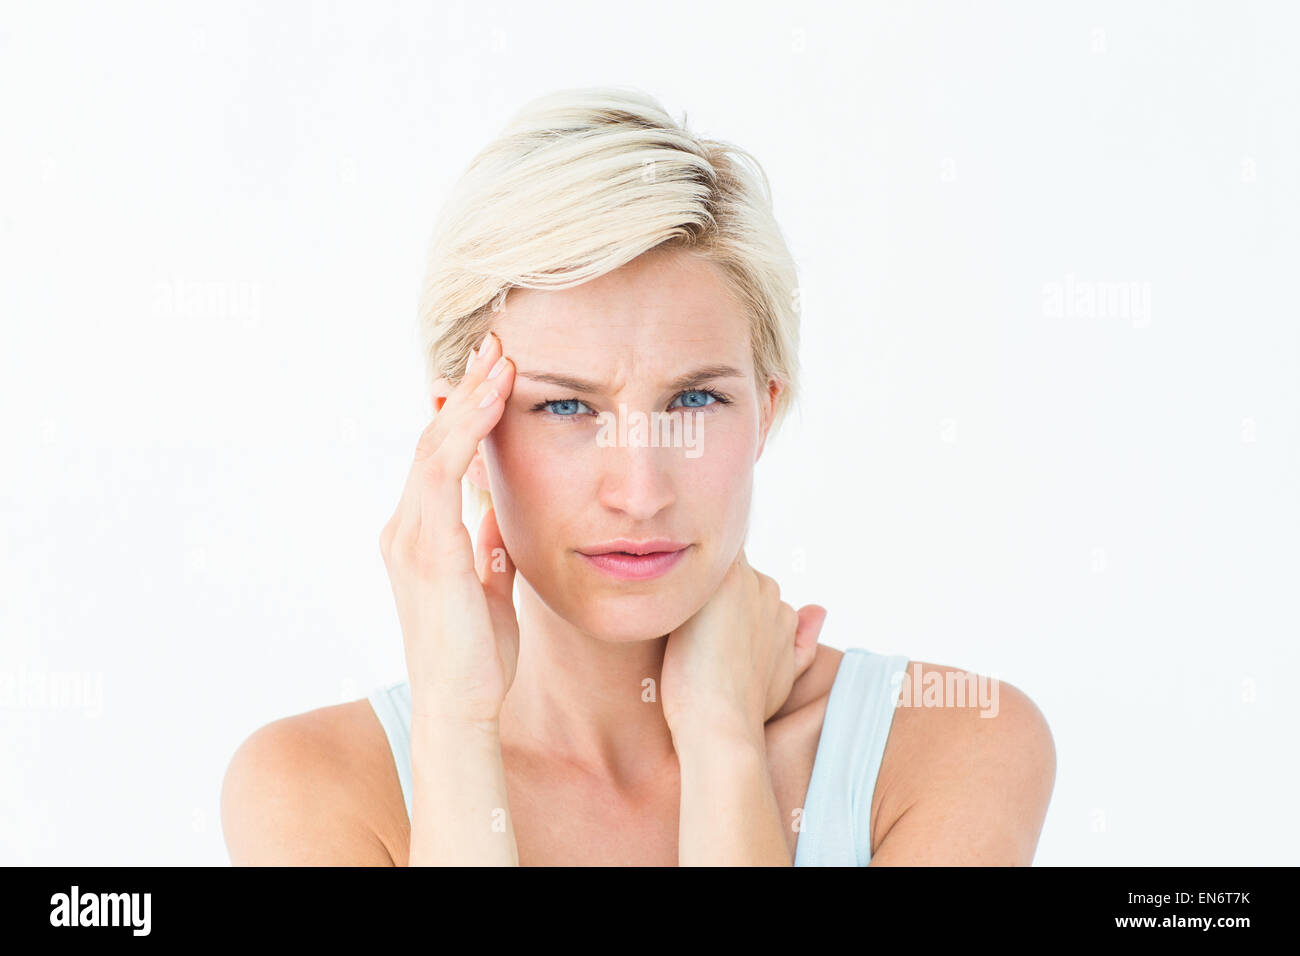 Blonde woman suffering from headache and neck ache Stock Photo